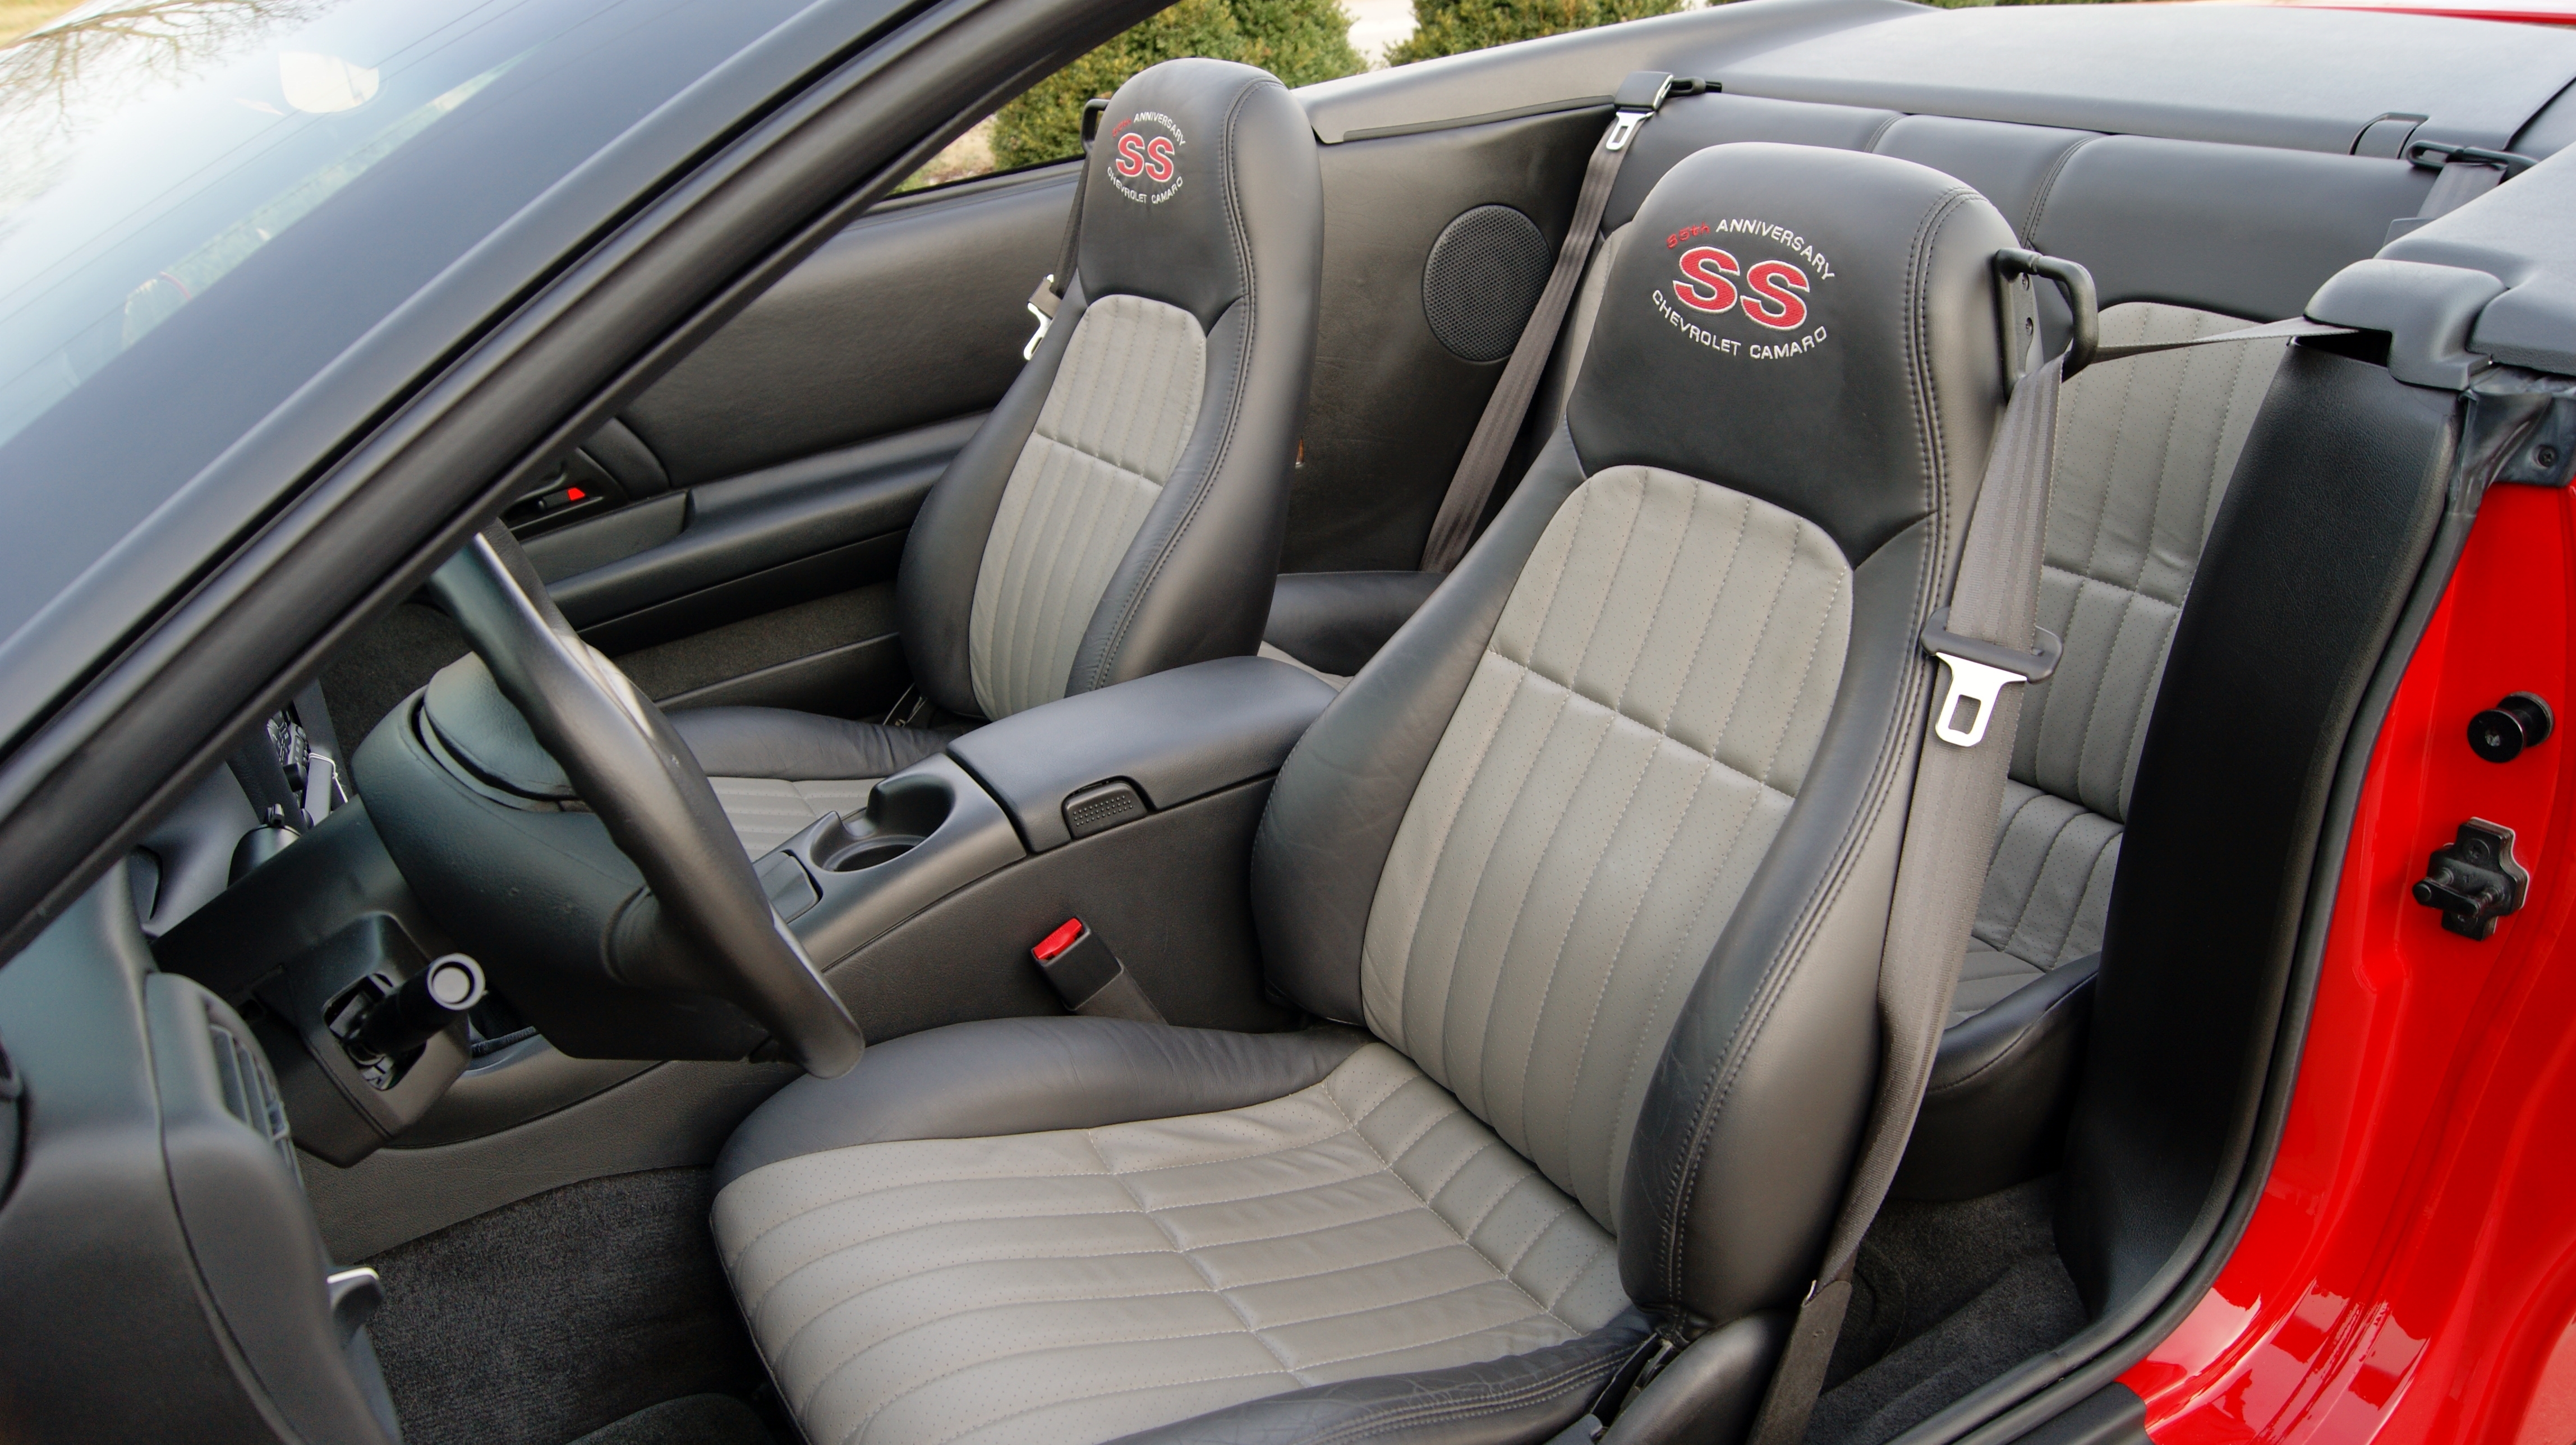 Mint 2002 Camaro Ss 35th Anniversary Le Leather Seats Black And Gray